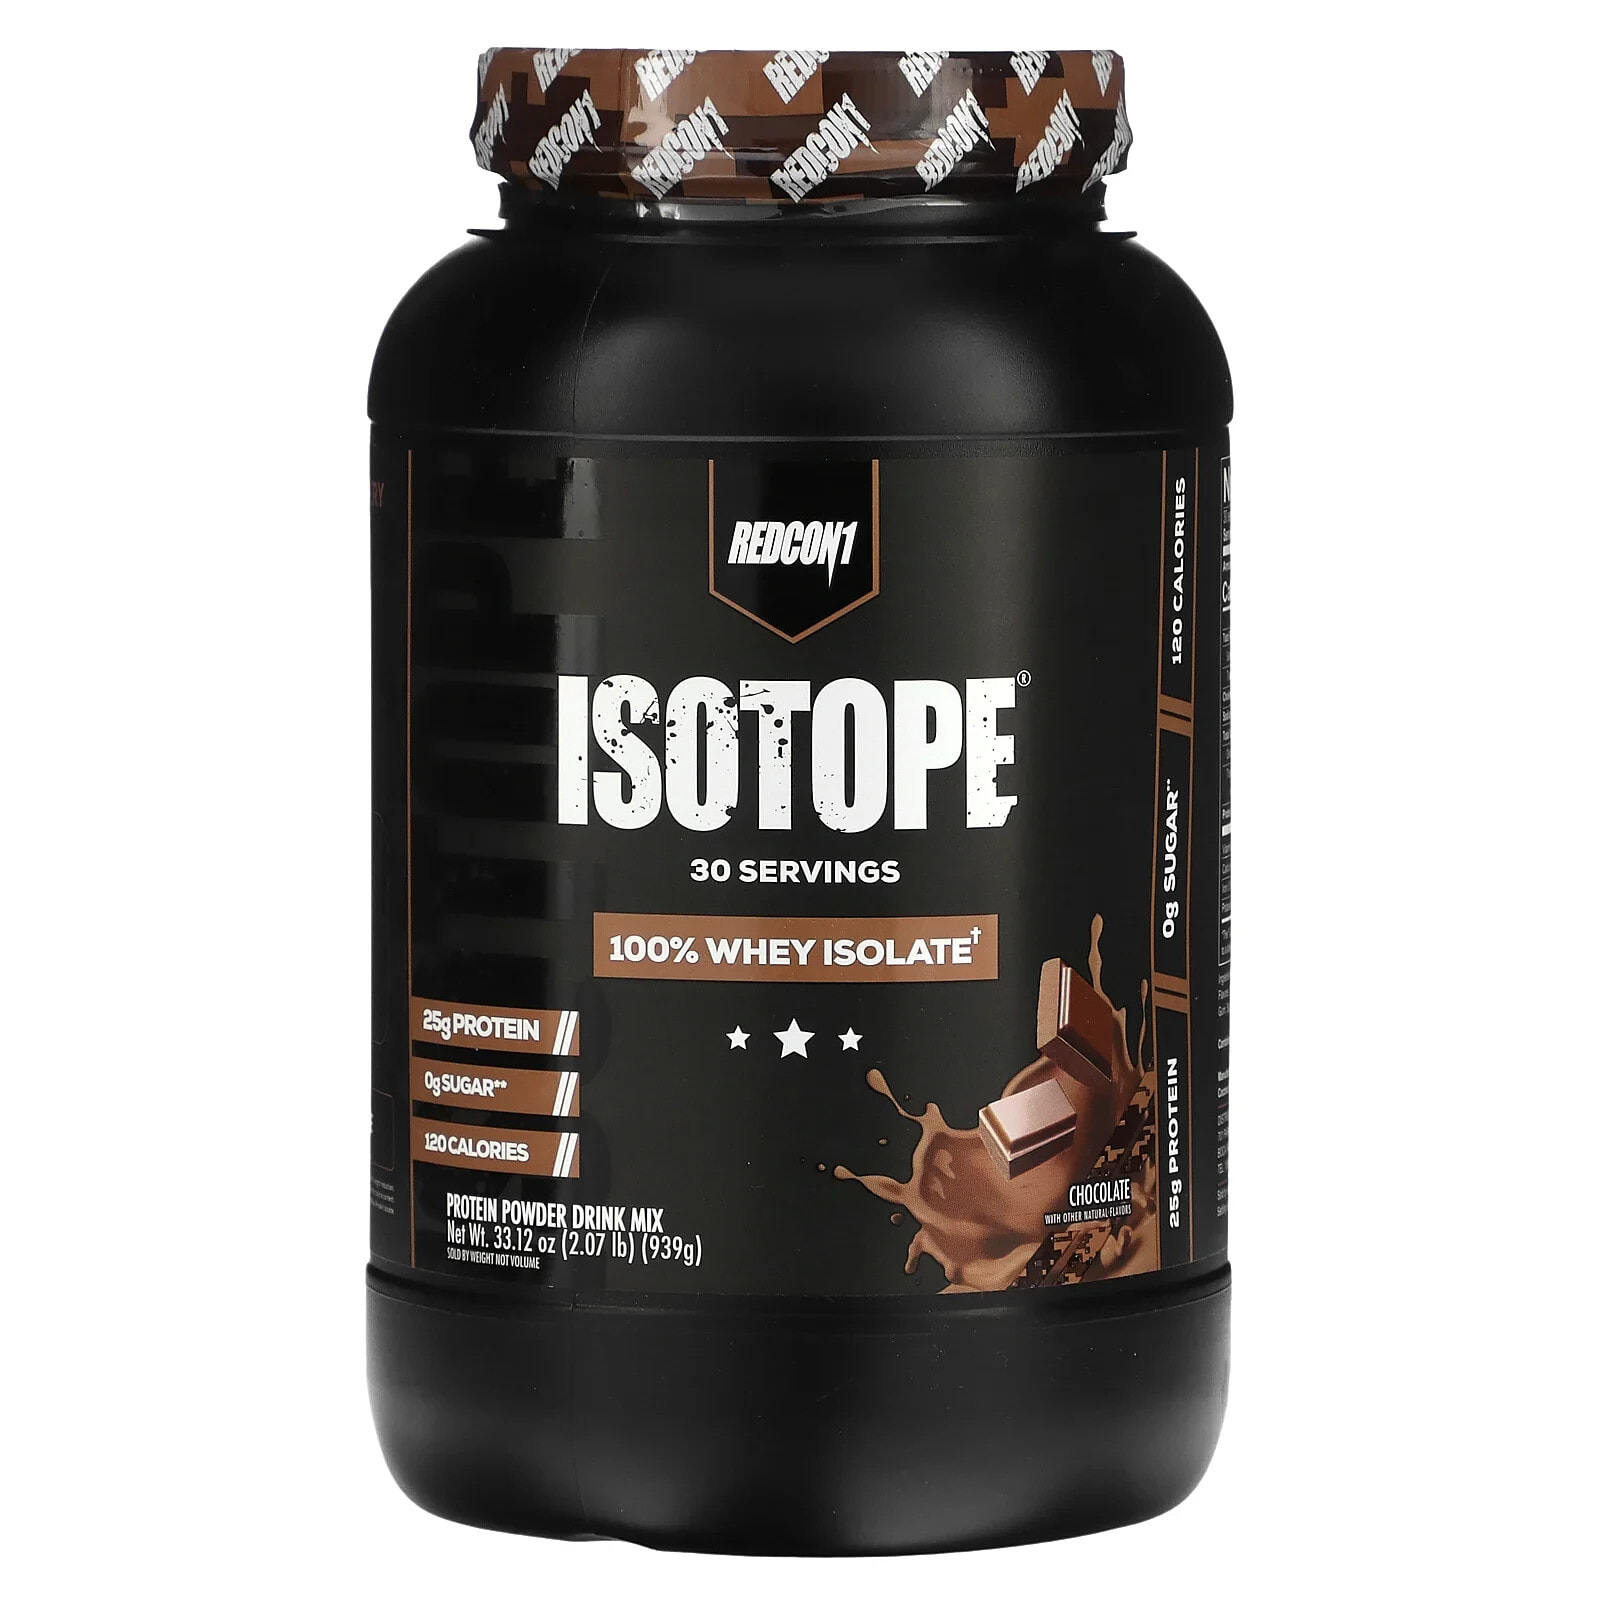 Isotope, Protein Powder Drink Mix, Chocolate, 2.07 lbs (939 g)